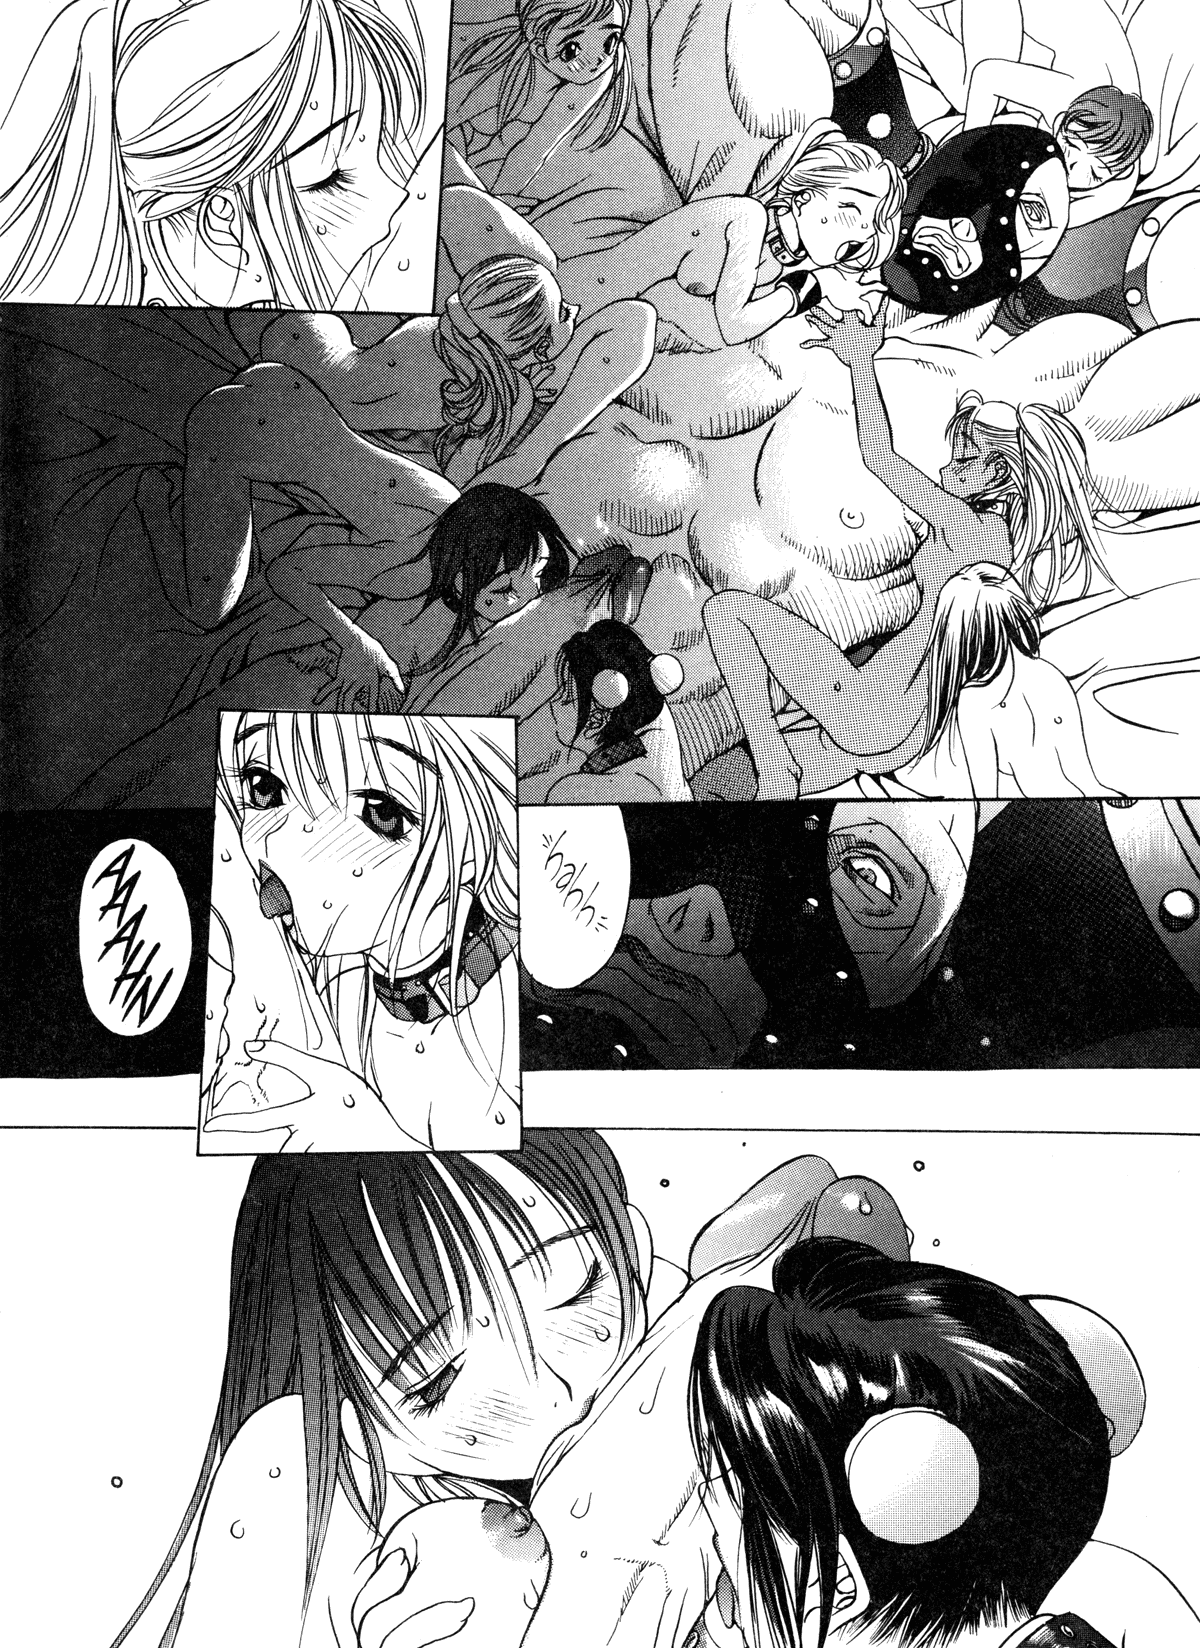 [Oh! Great] Silky Whip 9 [English] 